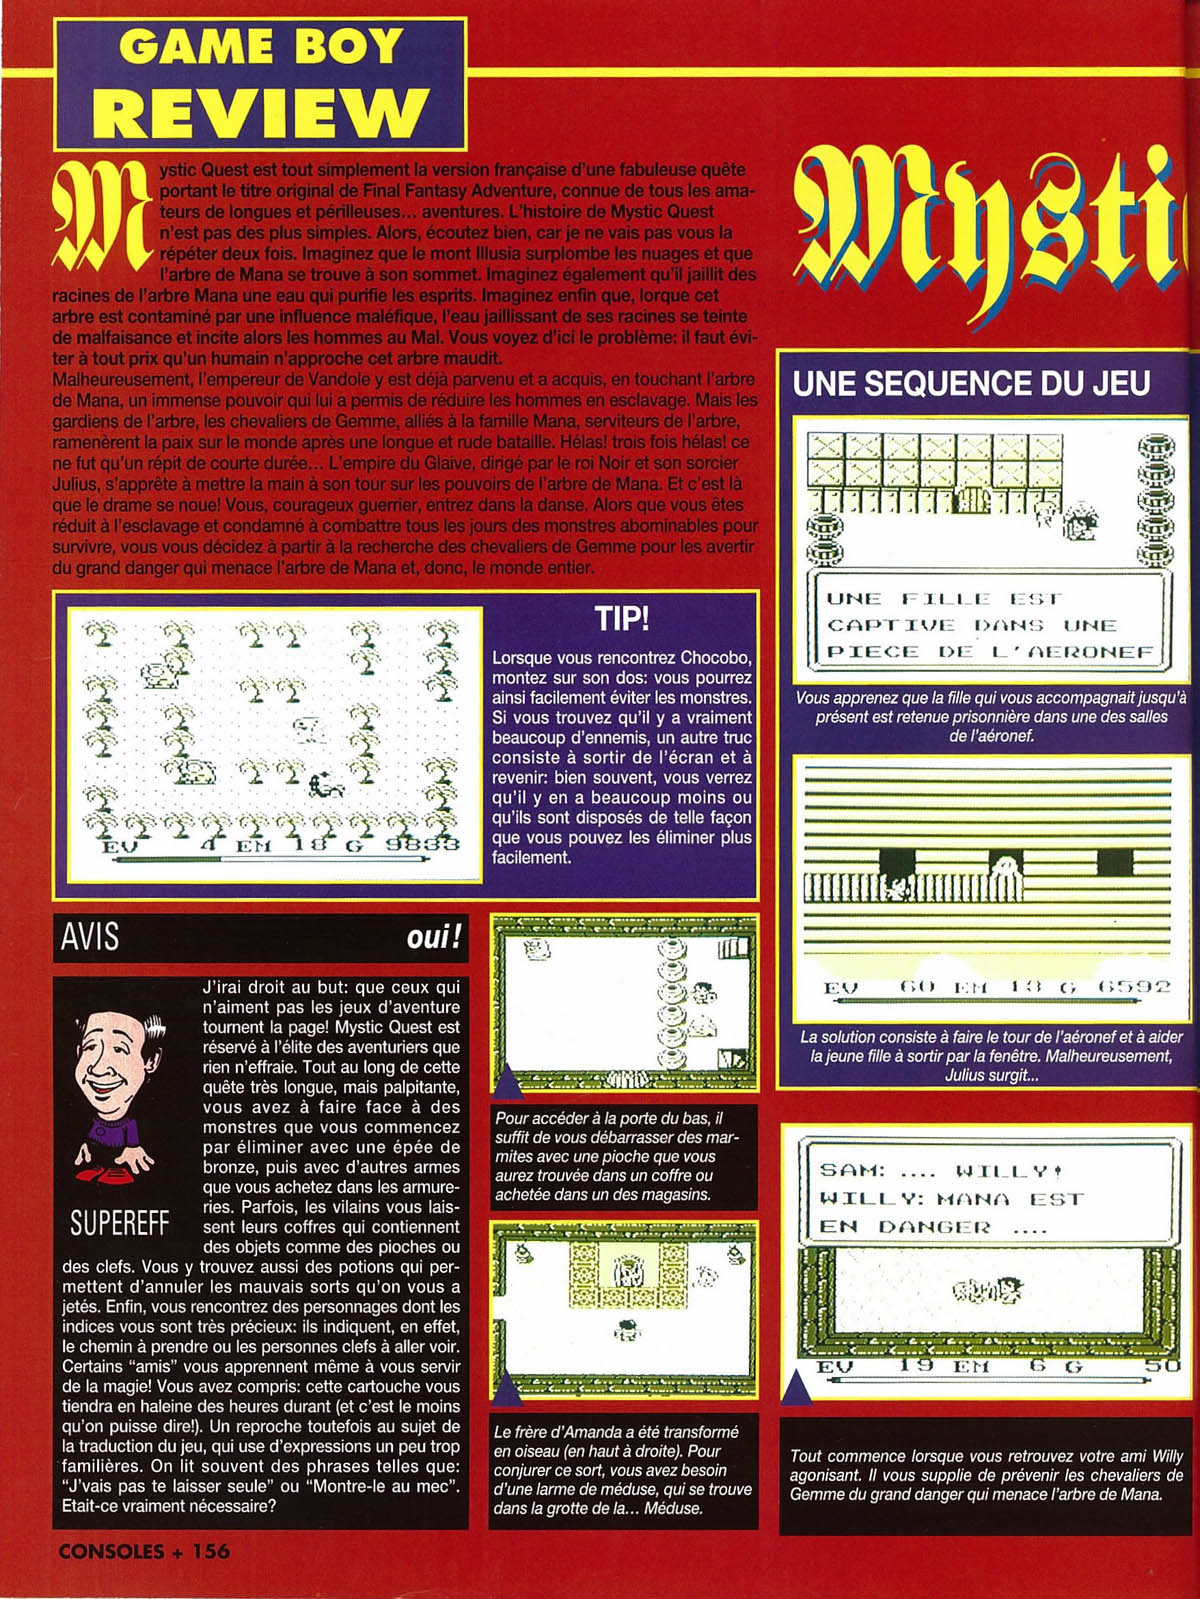 tests//765/Consoles + 023 - Page 156 (septembre 1993).jpg